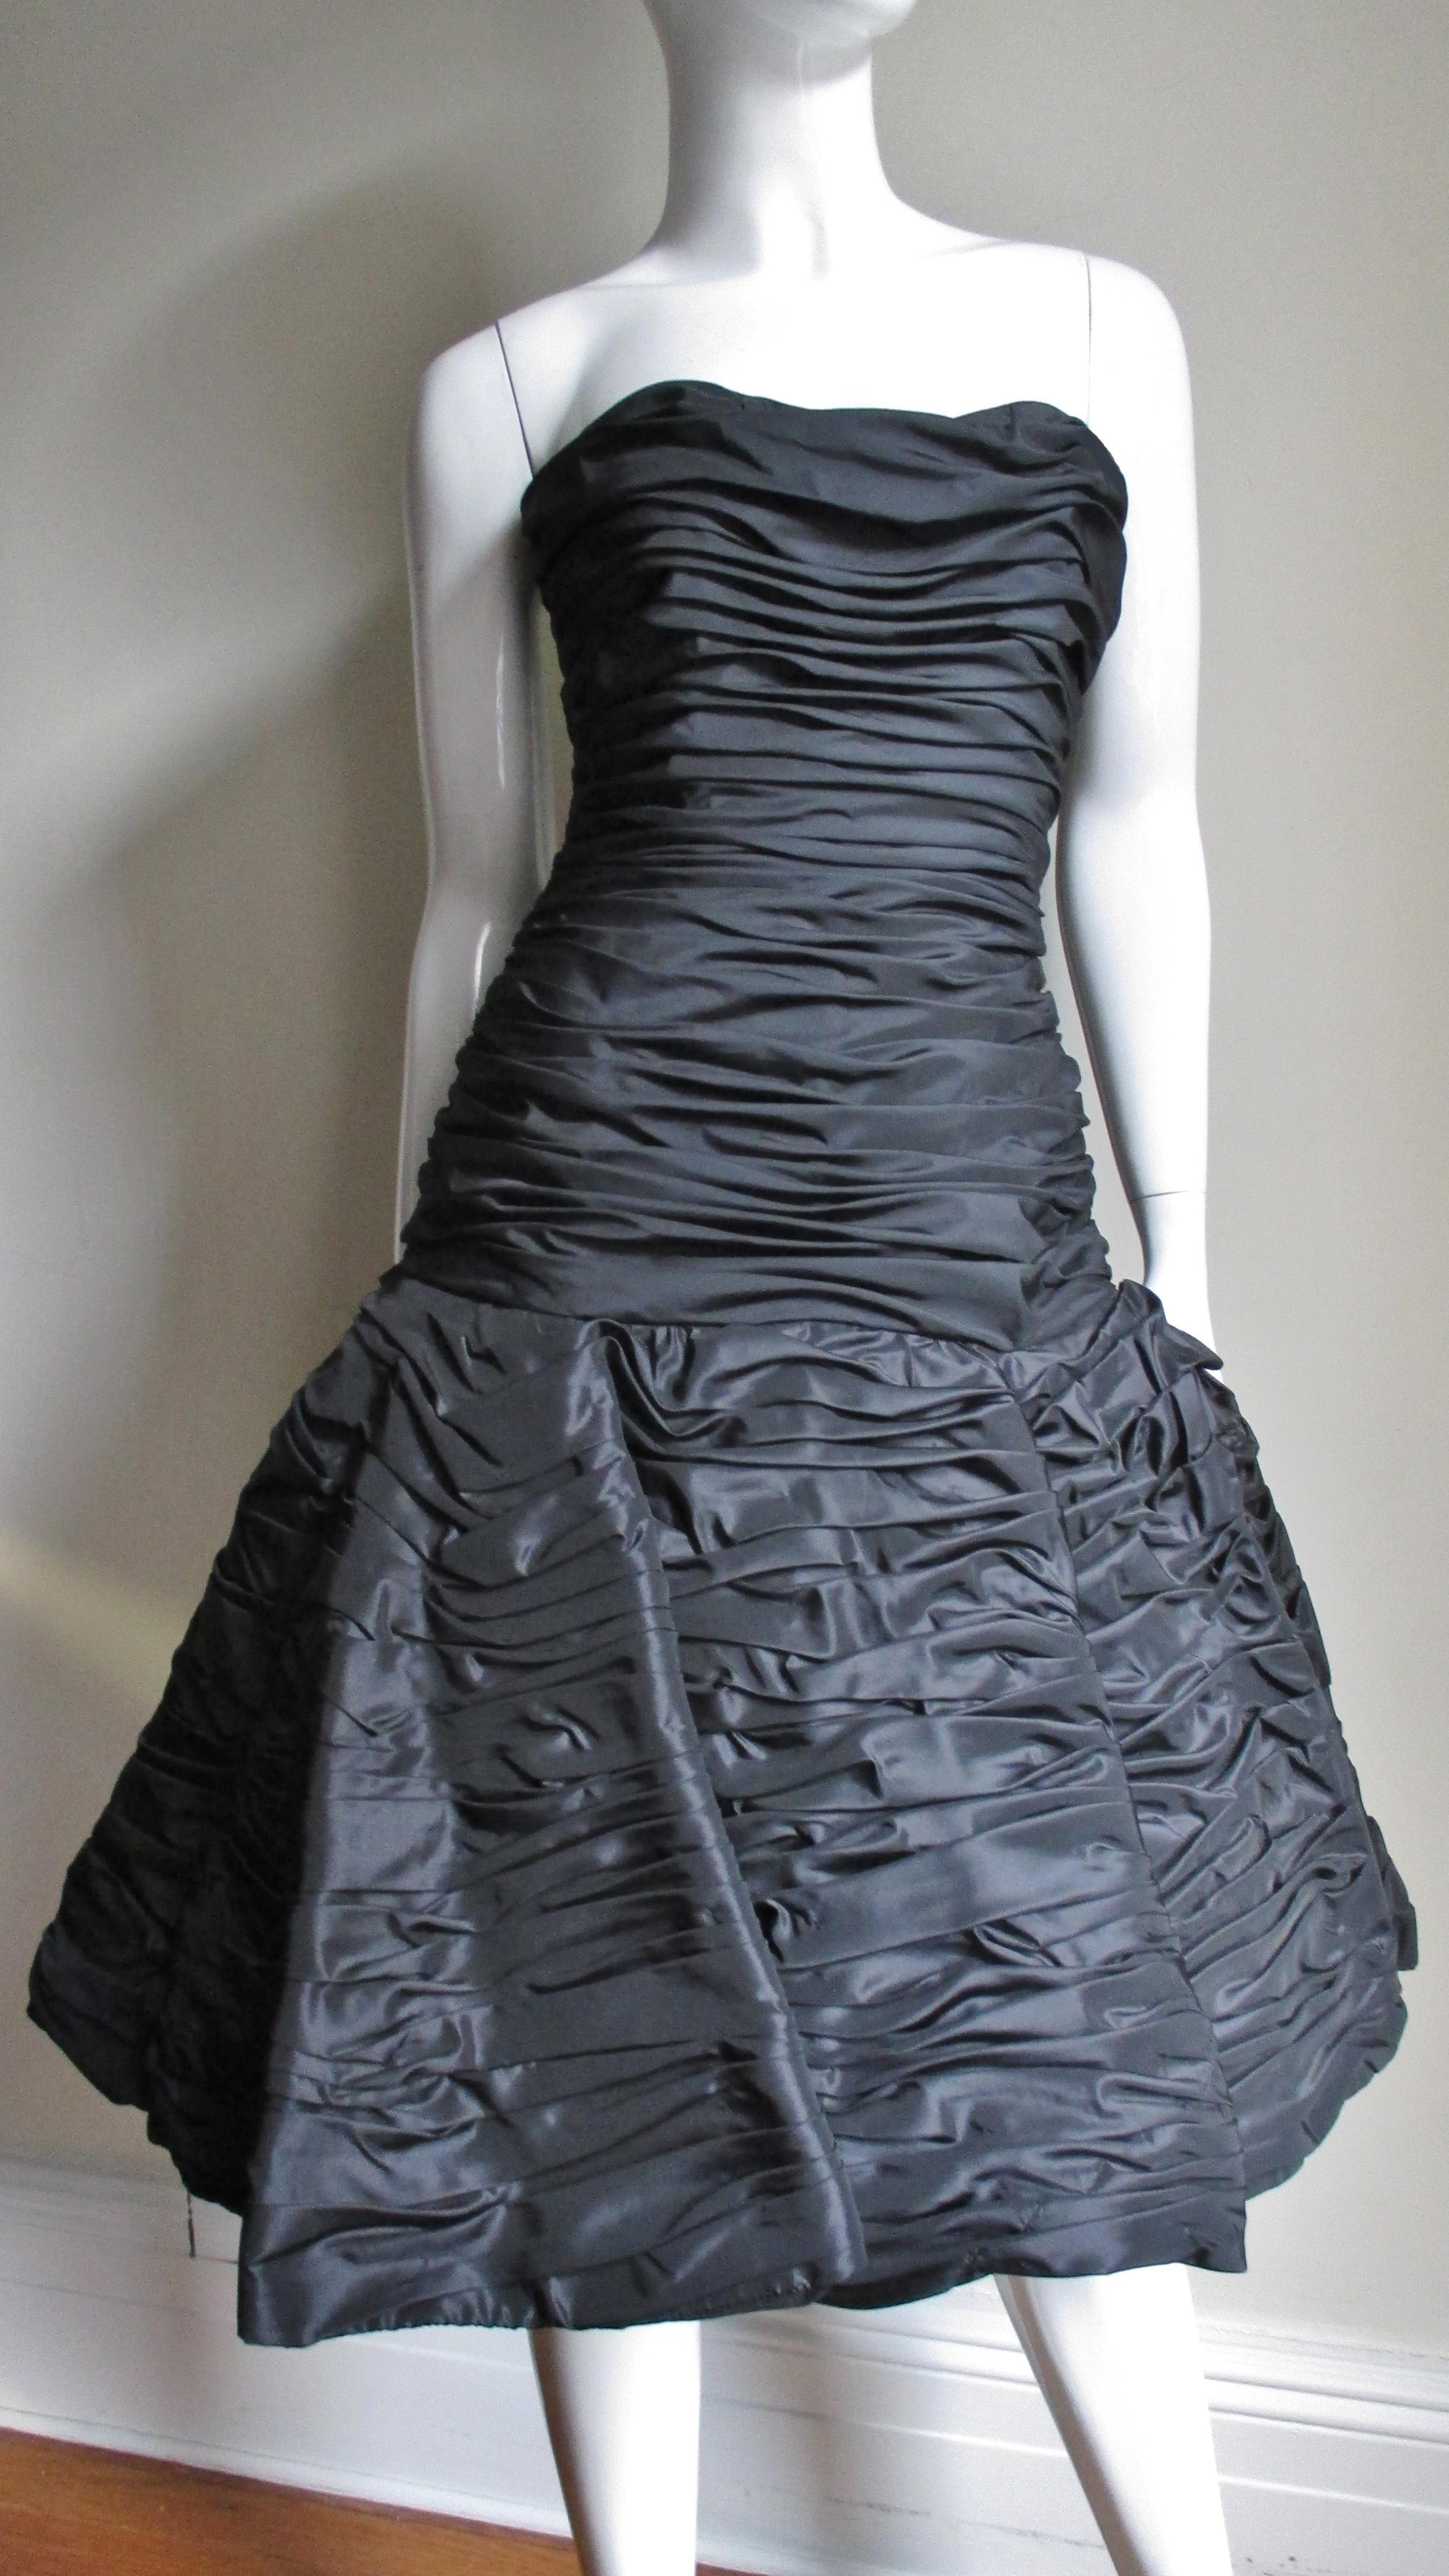 A beautiful black taffeta dress from Victor Costa. It has a strapless sweetheart neckline and a horizontally ruched bodice with vertical boning for support. The skirt is ruched, sculptural and full.  The dress has a back zipper and is fully